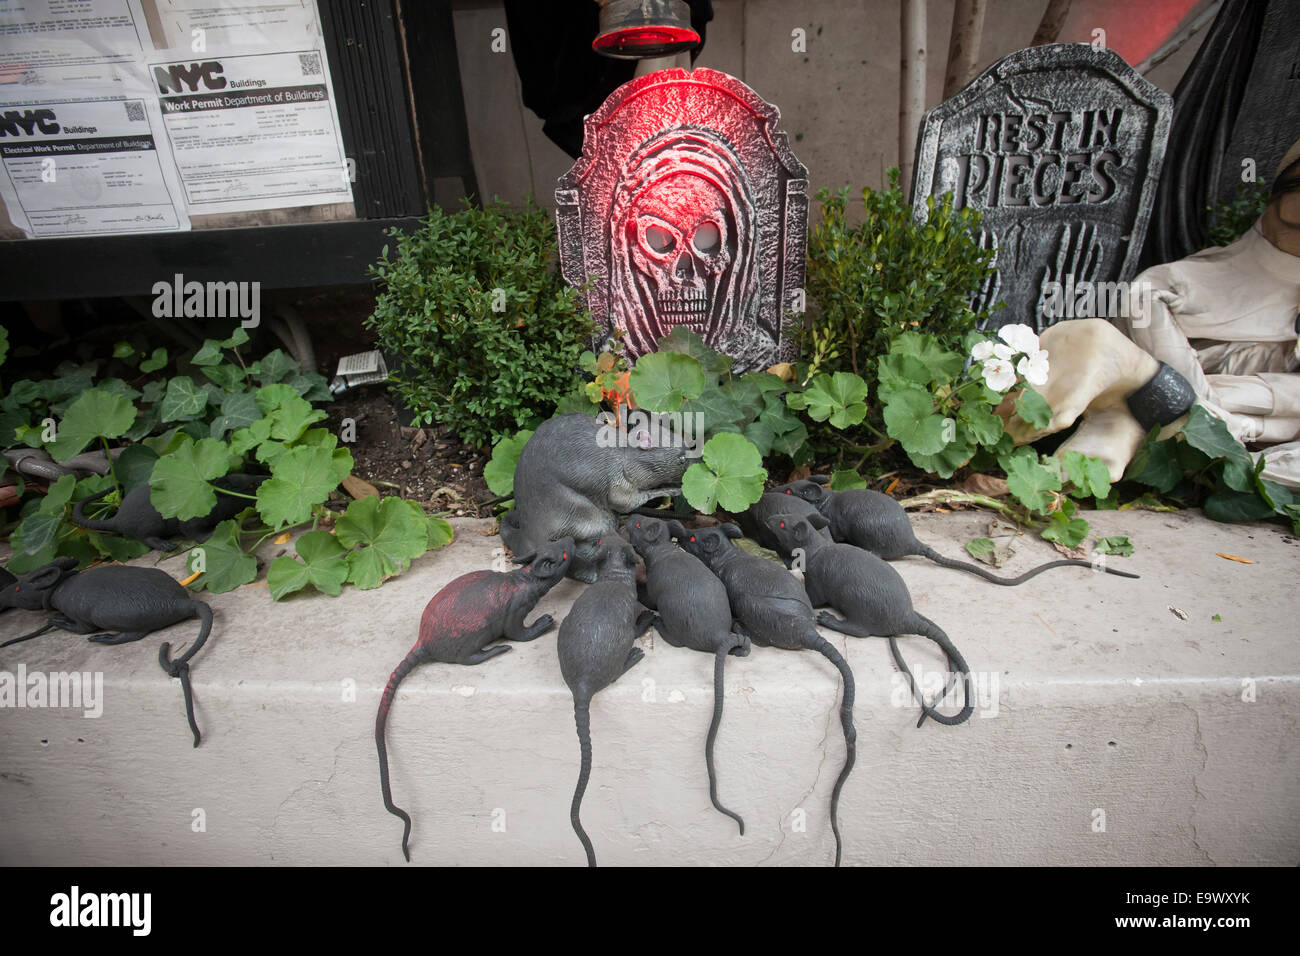 A family of rats are part of the gruesome display outside of former Penthouse publisher Bob Guccione's mansion Stock Photo